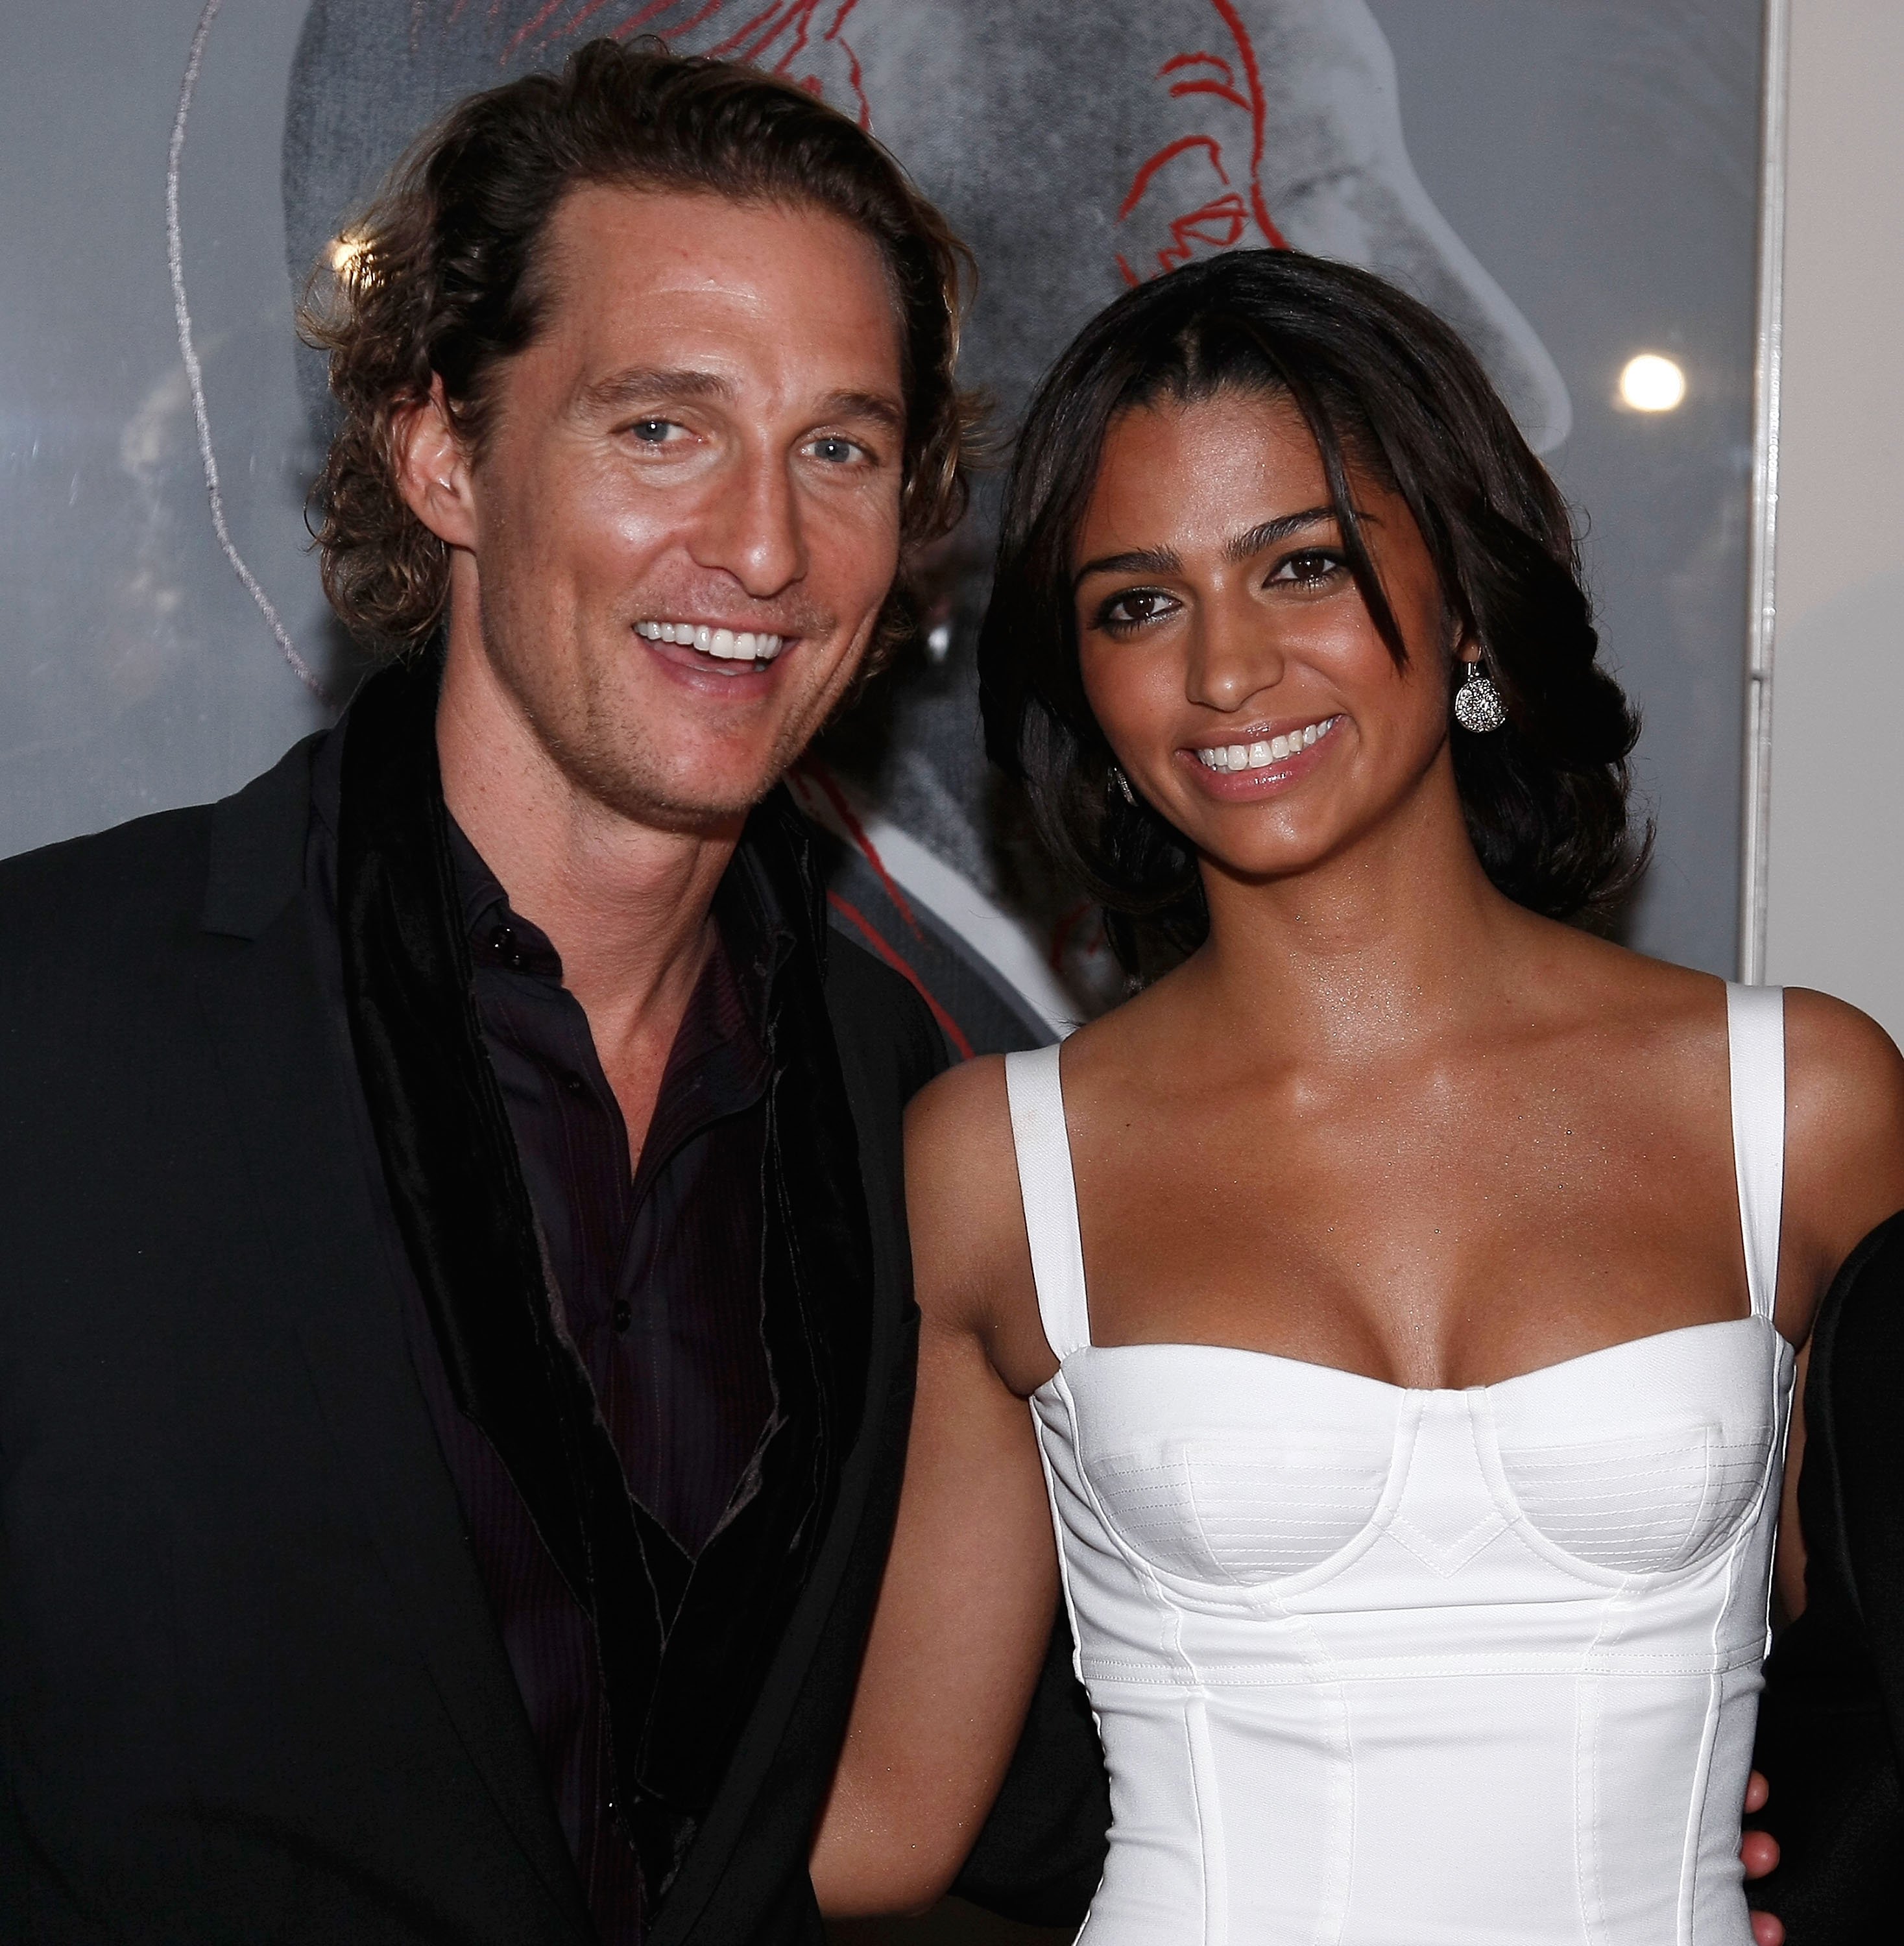 Matthew McConaughey and Camila Alves arrive at The Grammercy Park Hotel on December 4, 2007 in New York City. | Source: Getty Images 